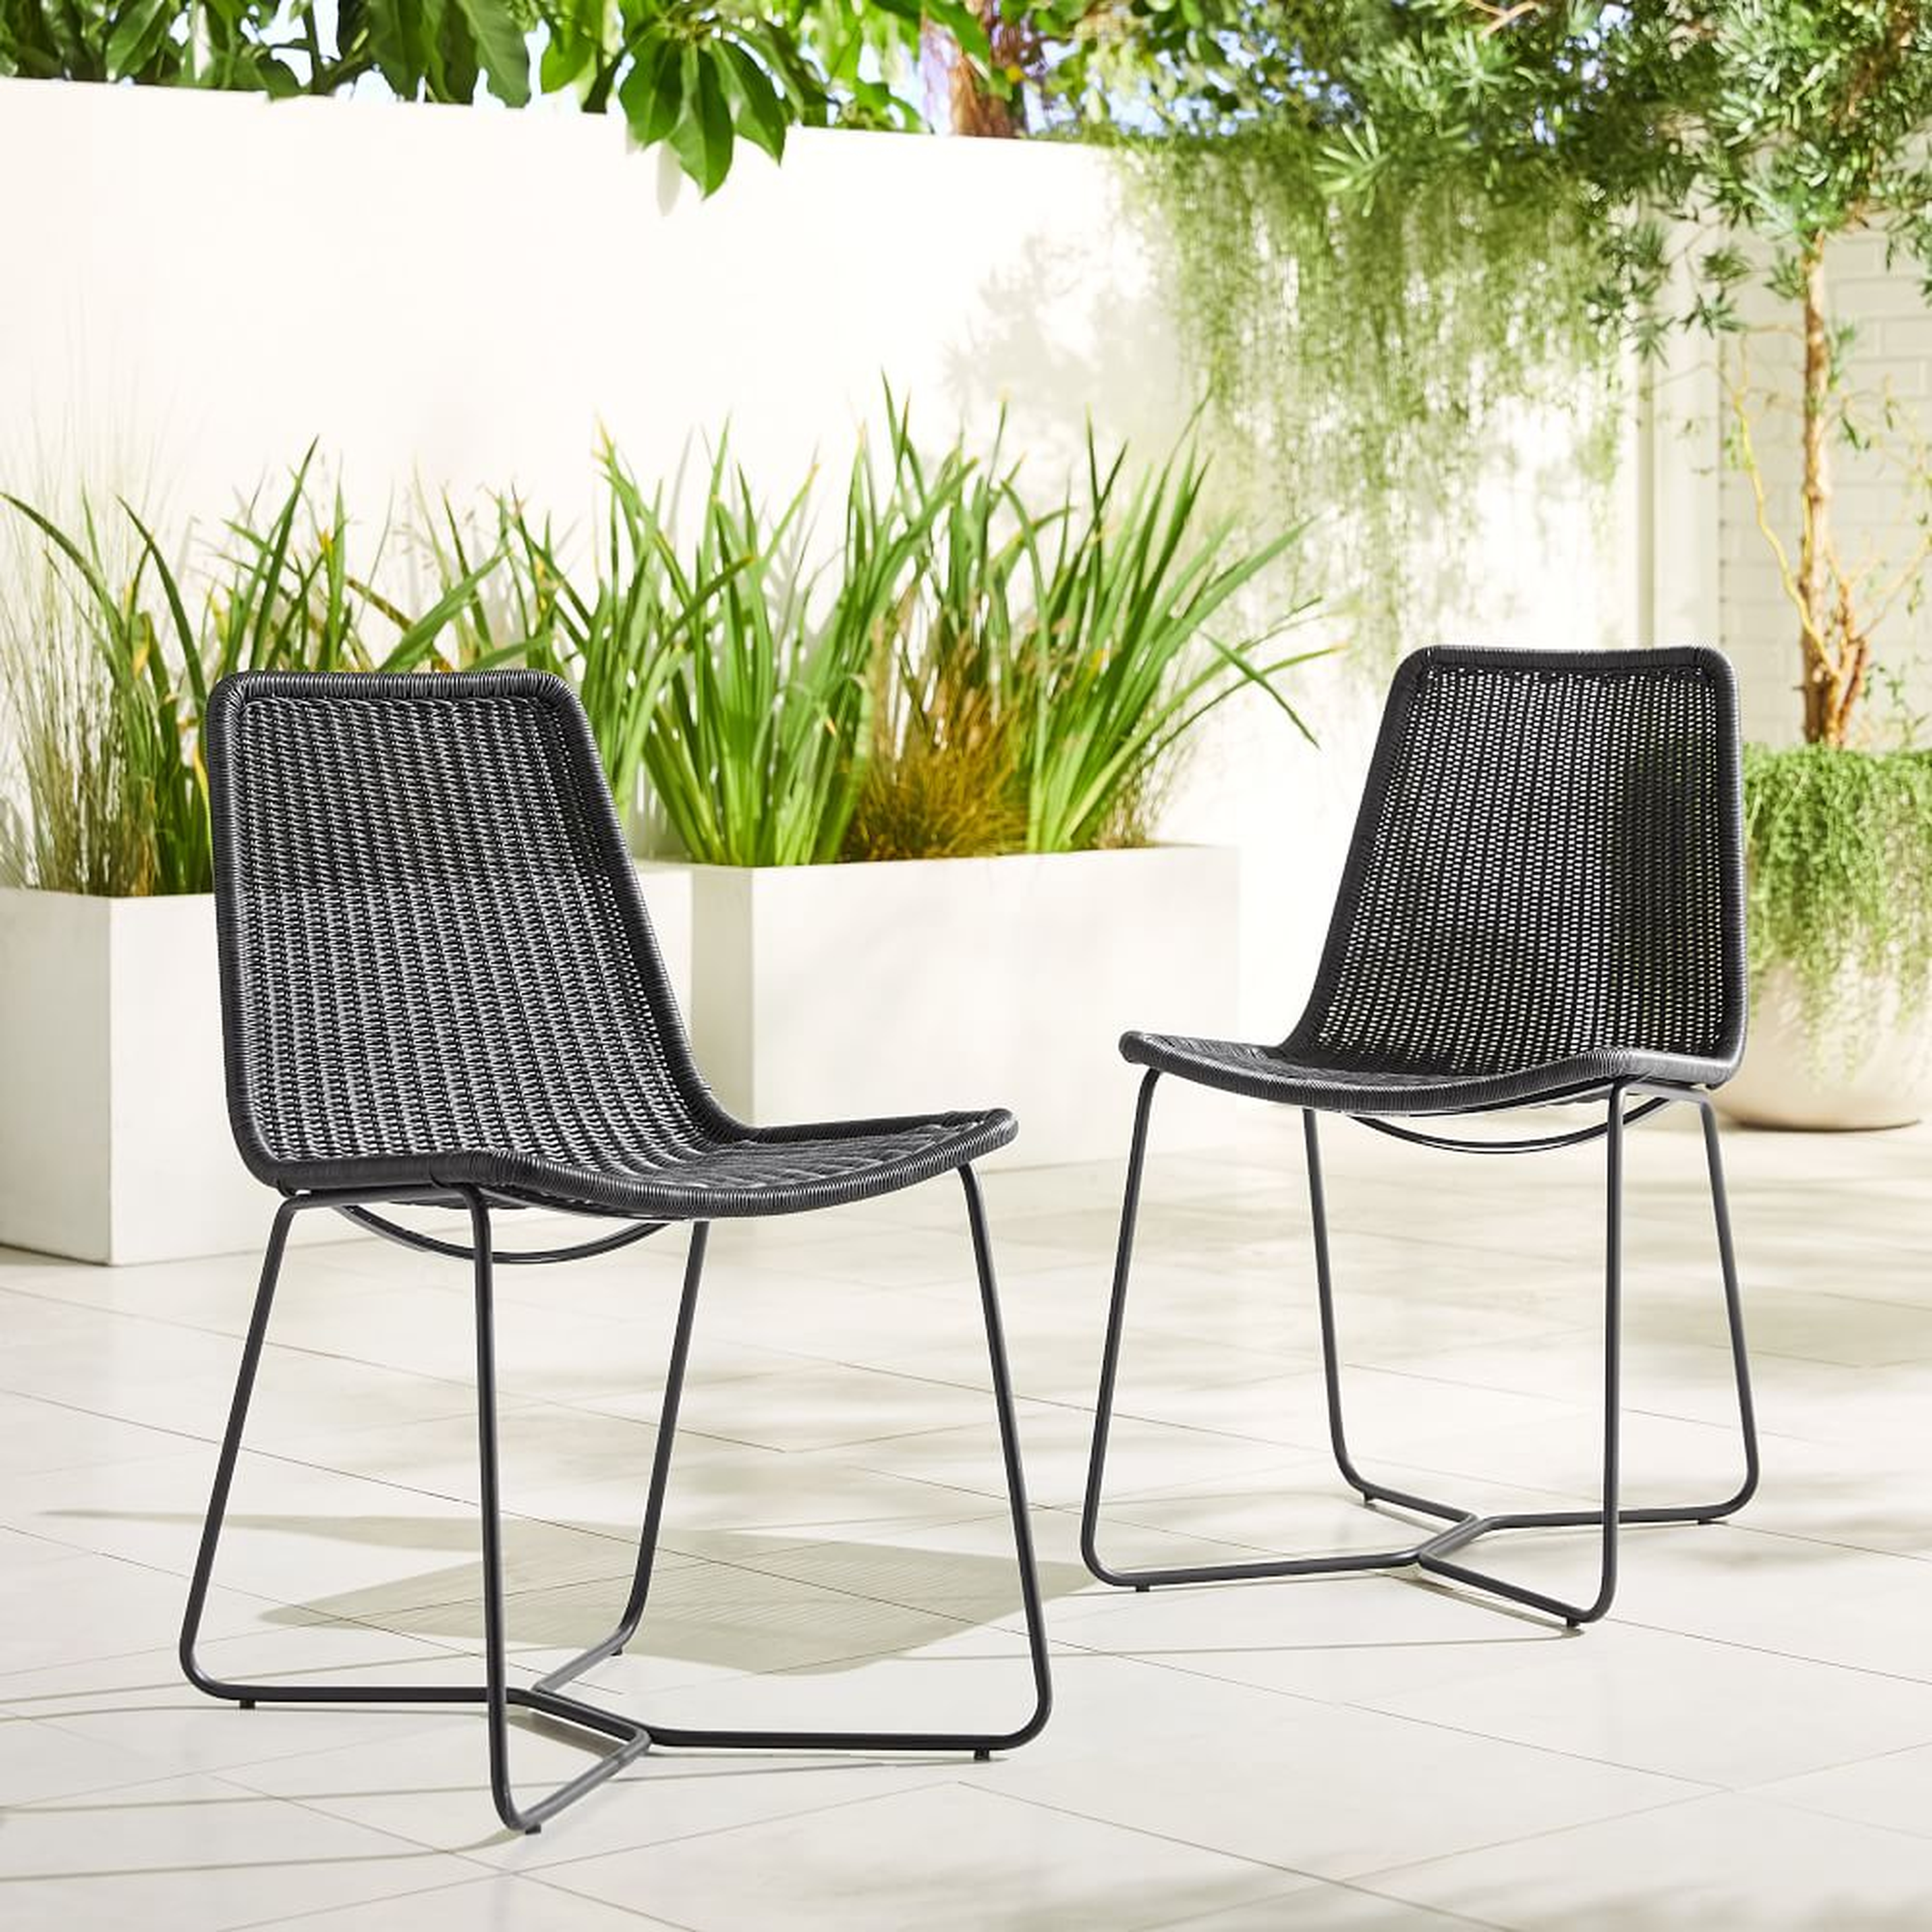 Slope Outdoor Dining Chair, S/2, Charcoal - West Elm